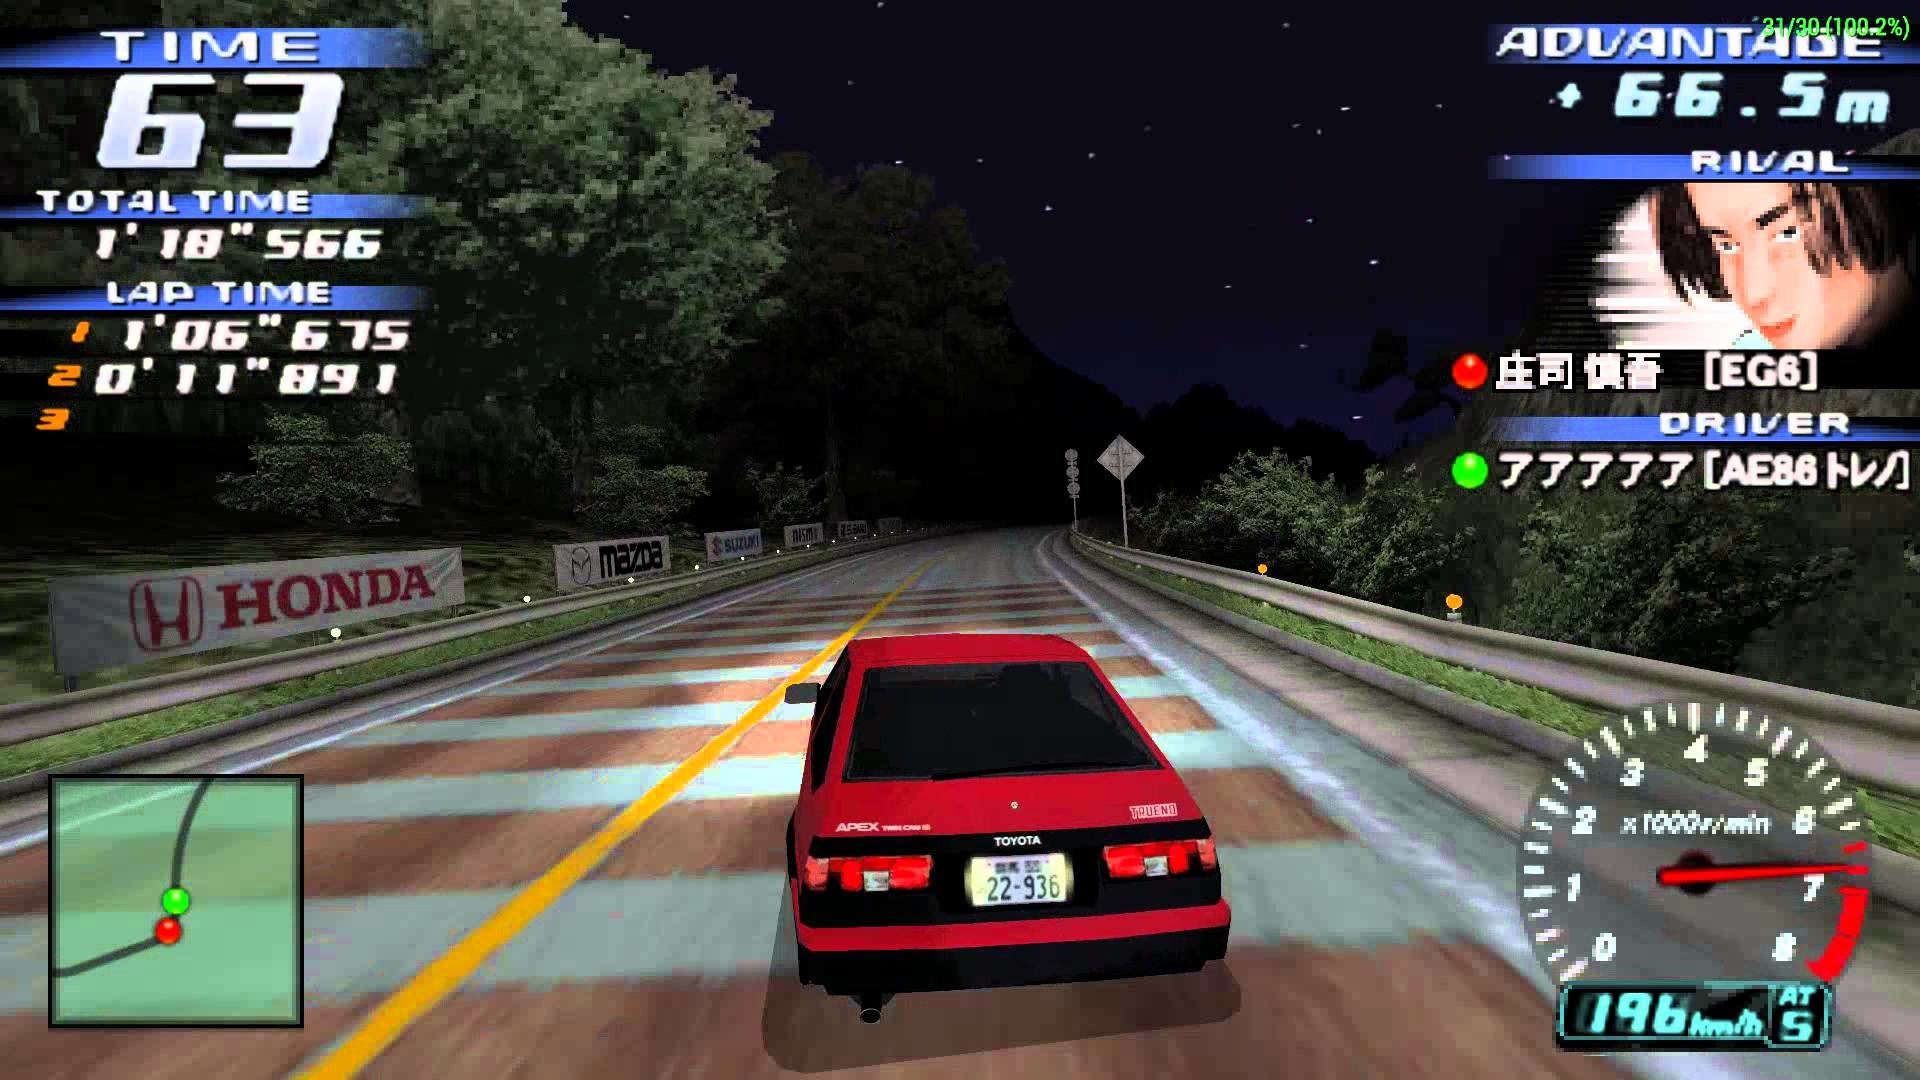 1920x1080 PPSSPP 0.9.6: Initial D Street Stage